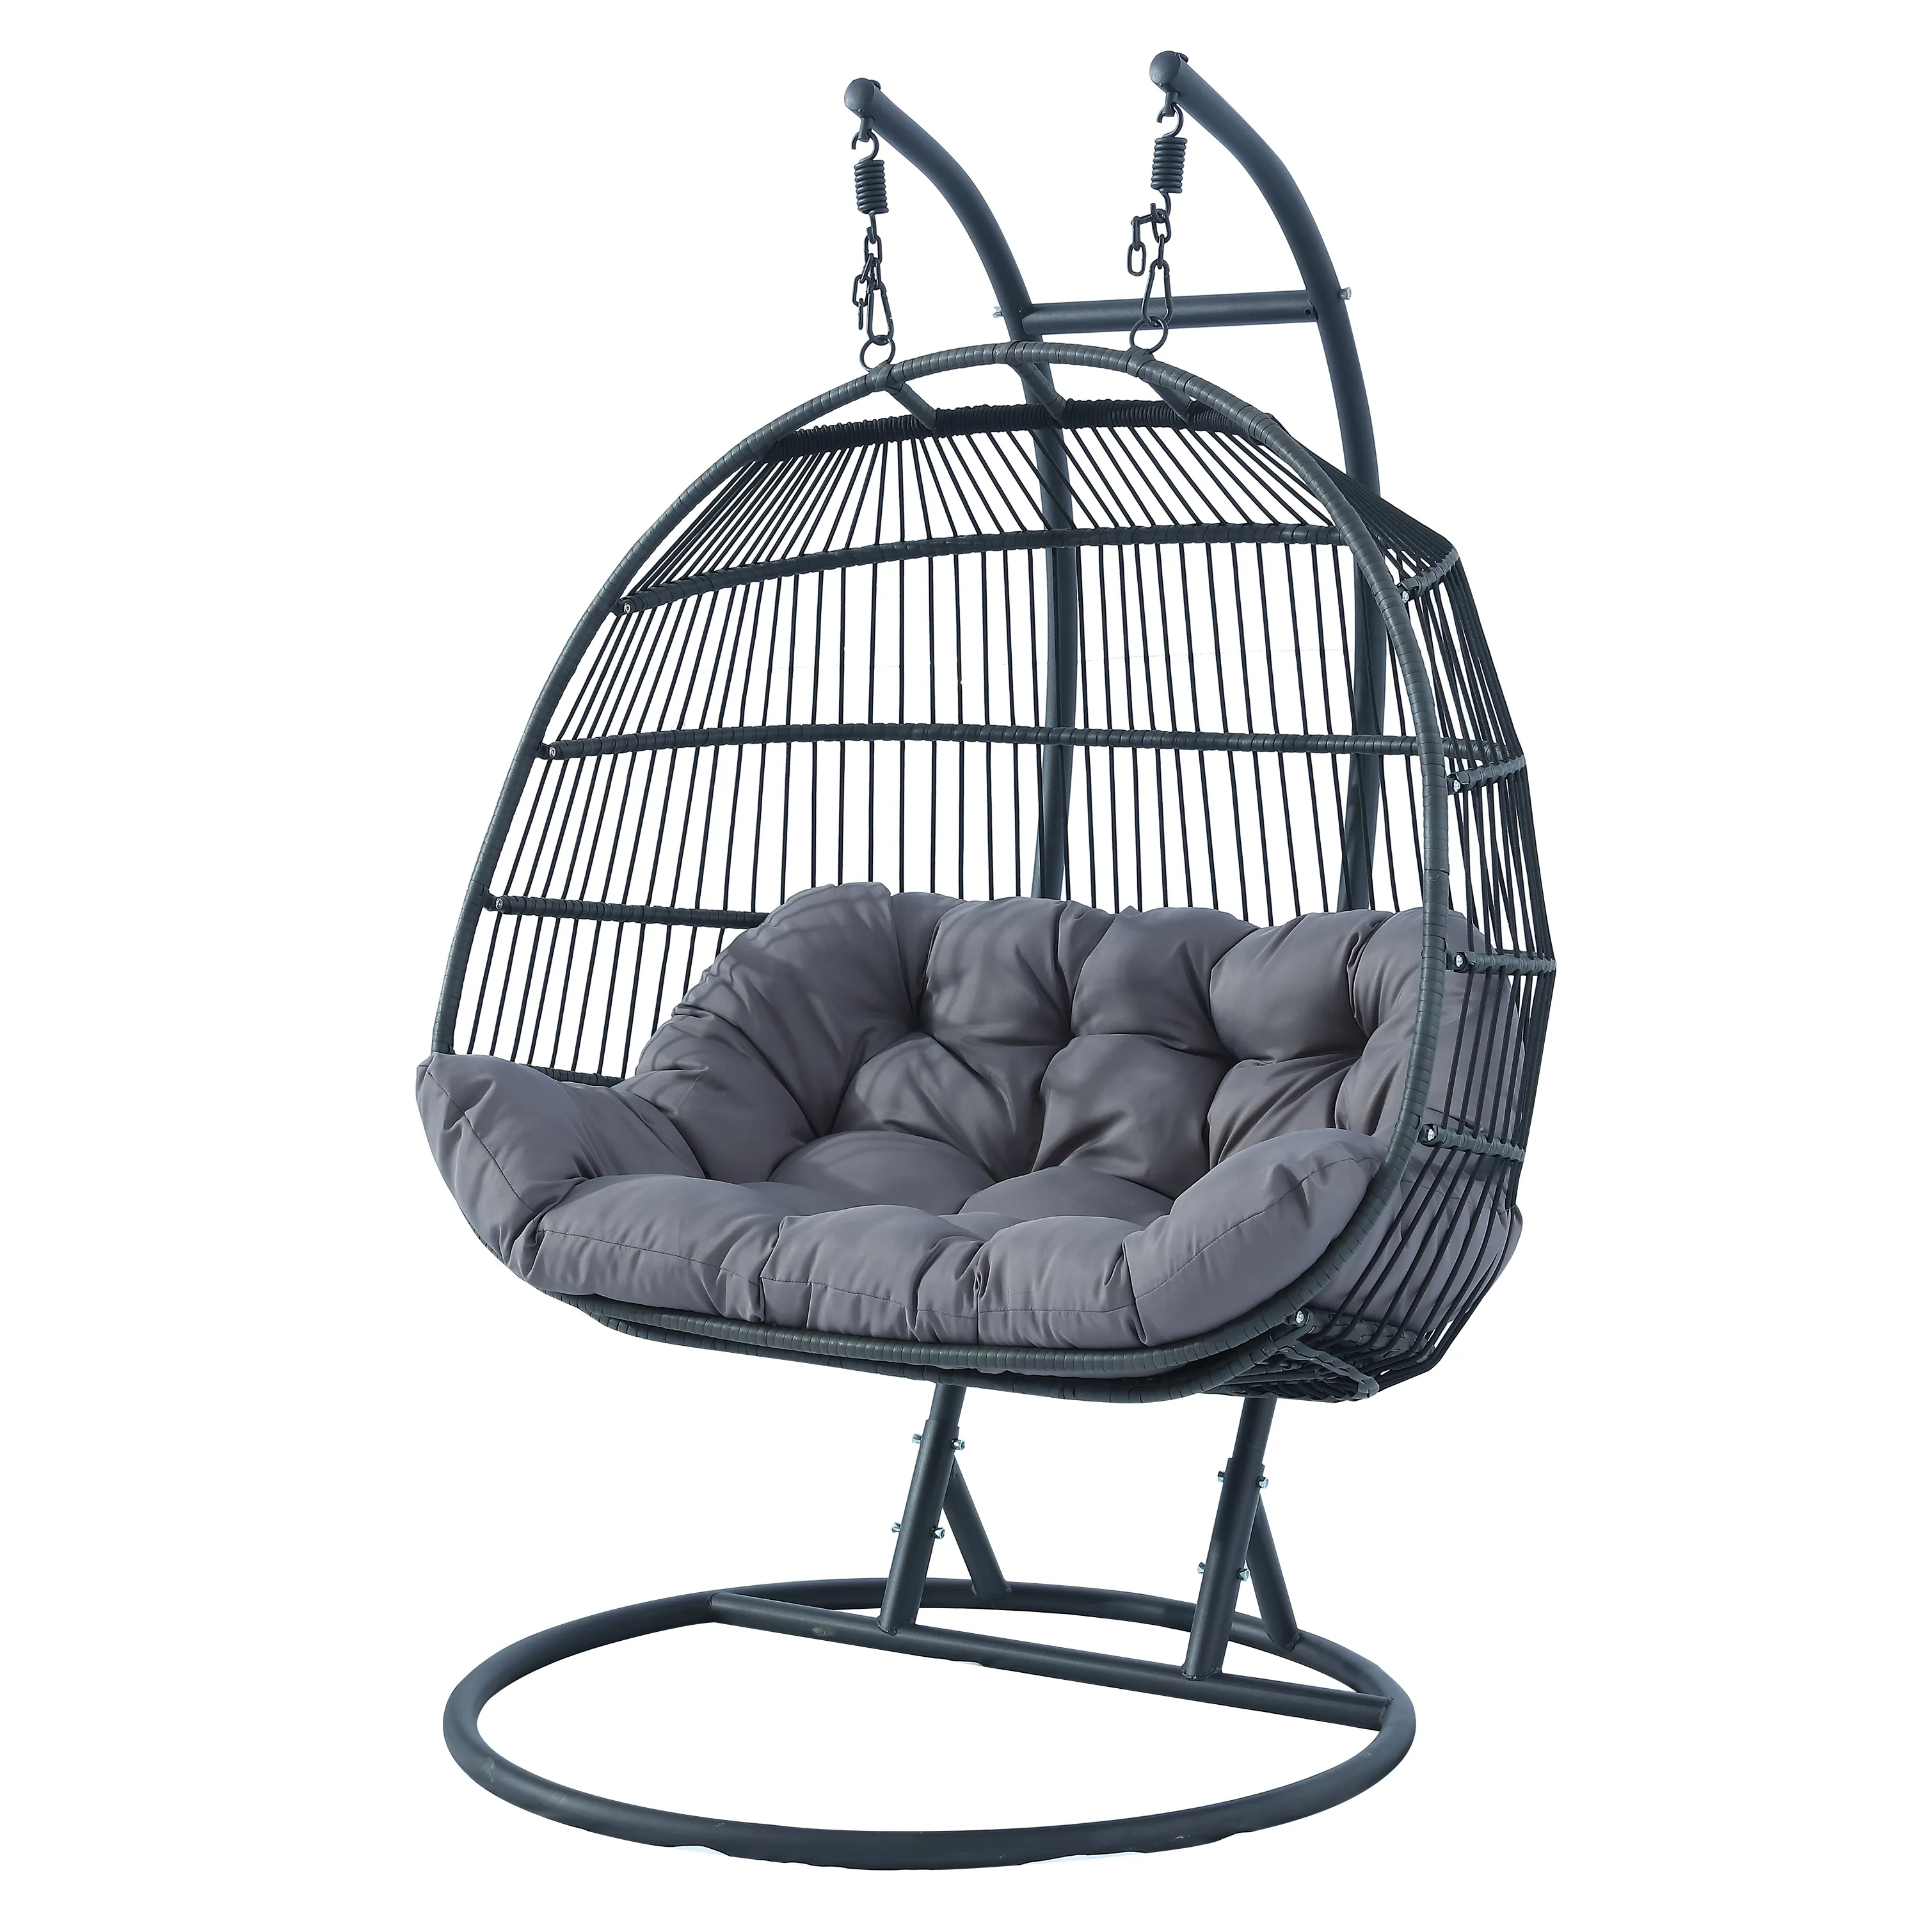 Wholesale Grey Hanging Egg Chairs Patio For Adult Double Stand Swing Pork Hammock Double Seats Baskets